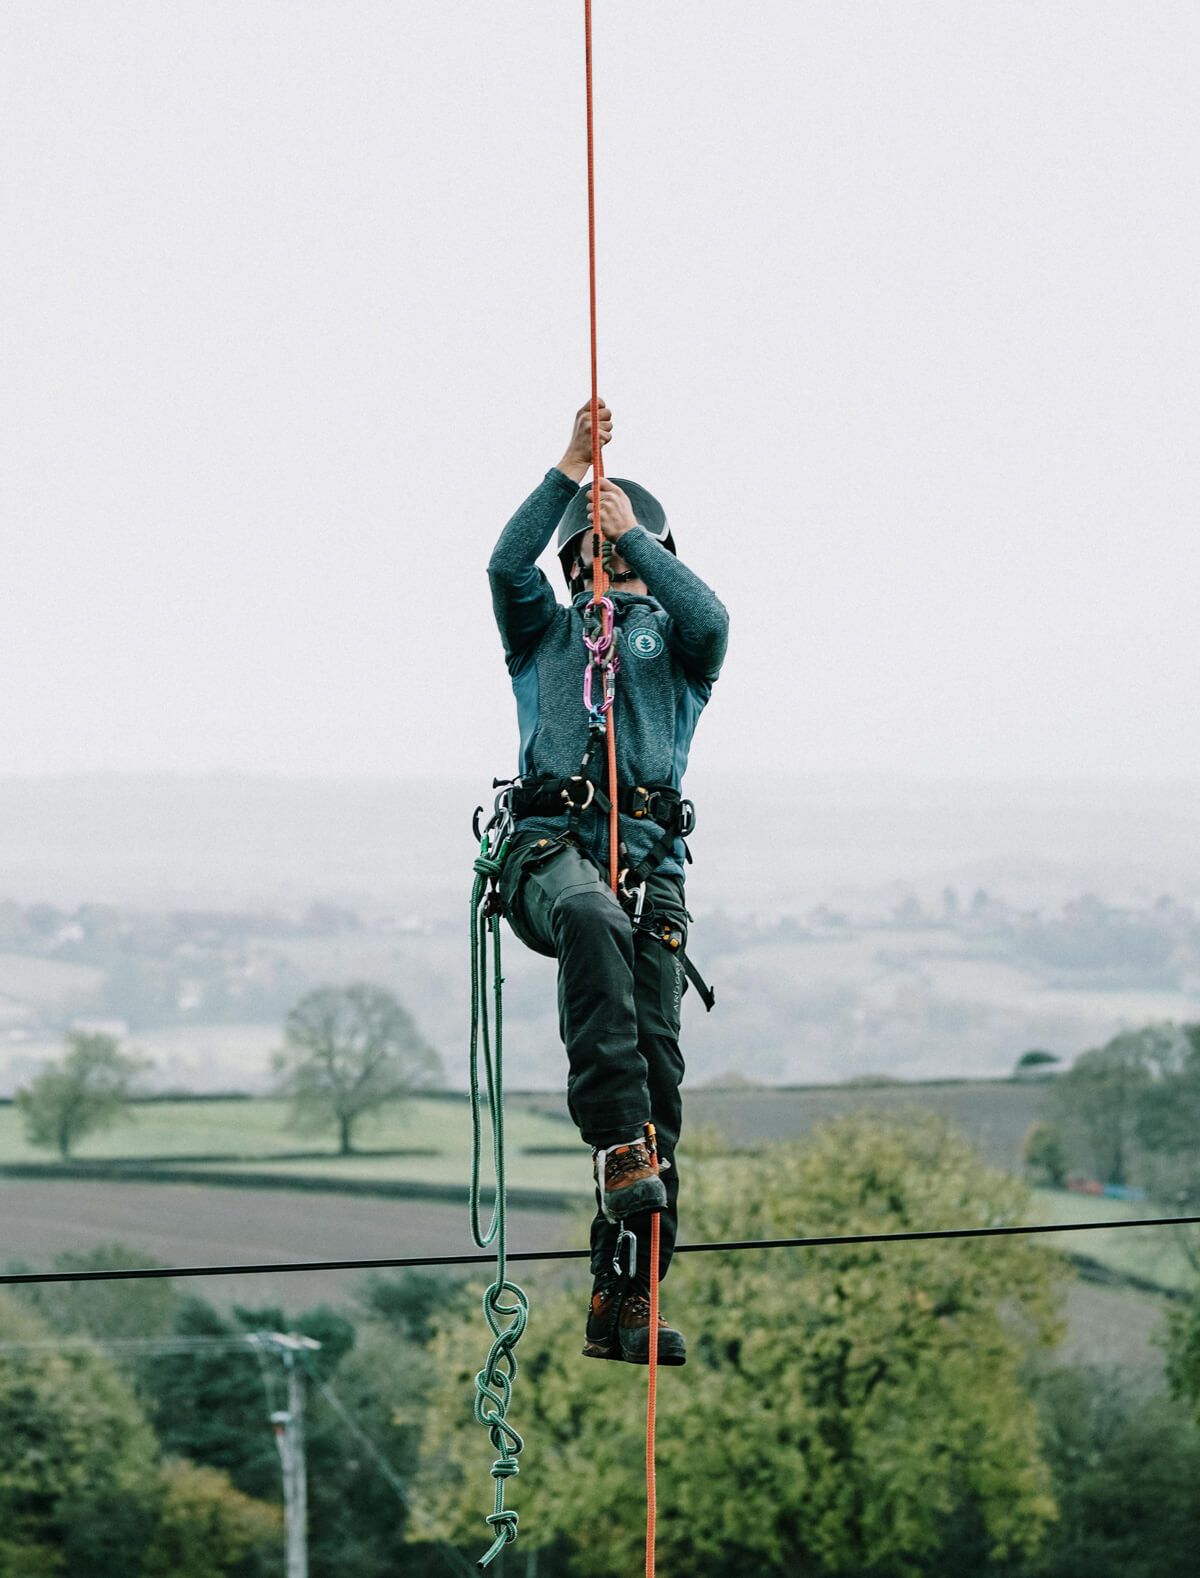 An Arborist climbing a tree in the Peak District in a harness and rope